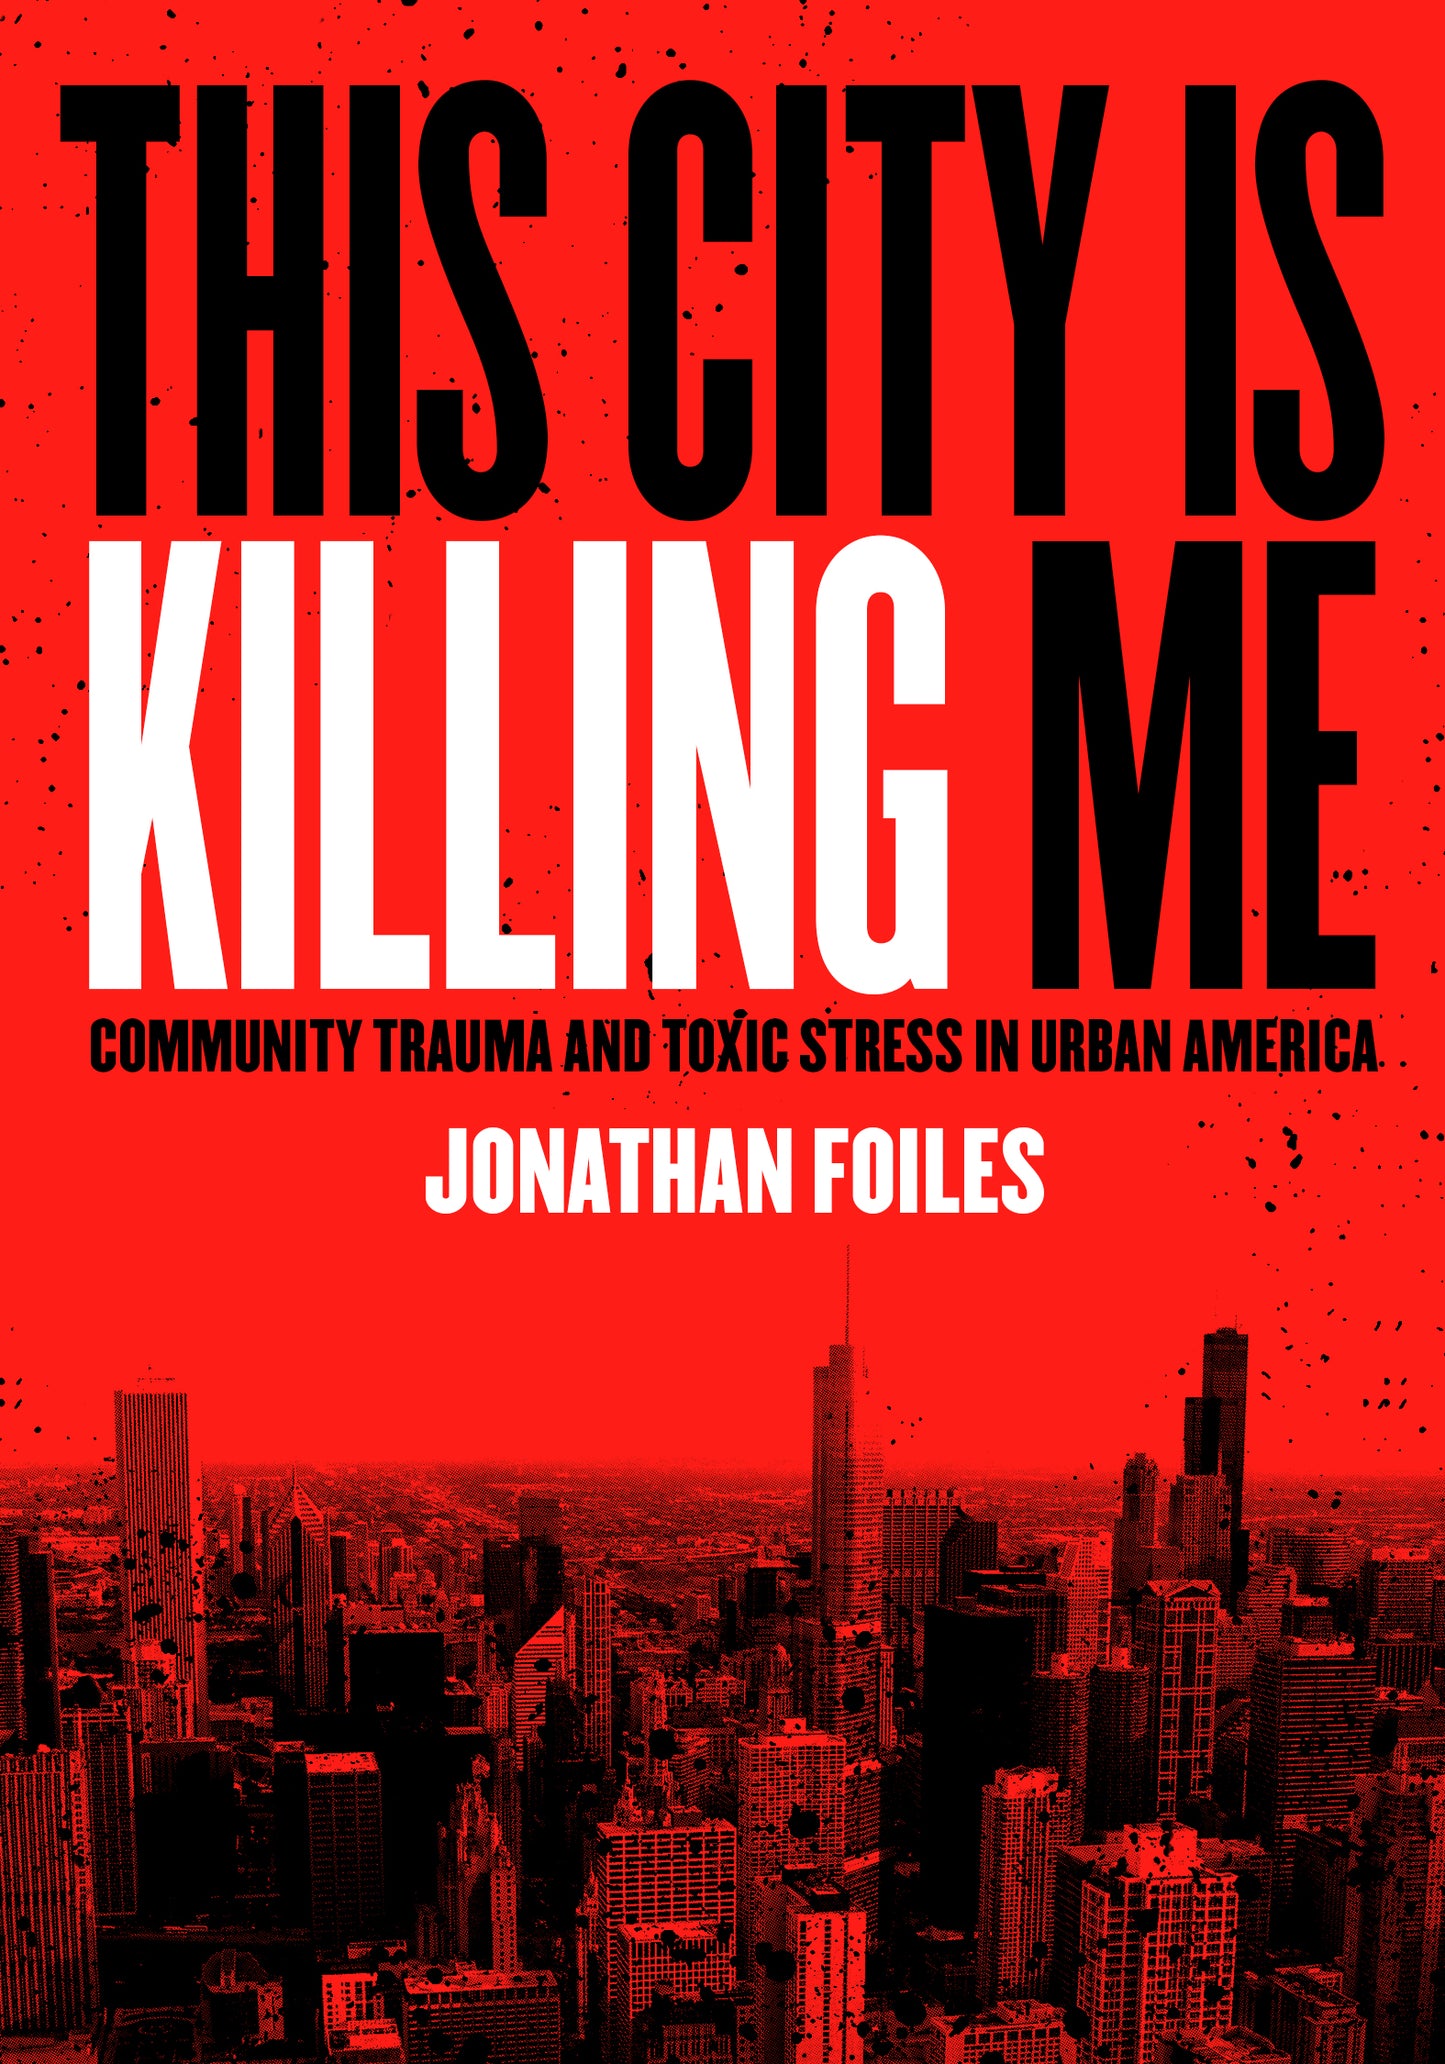 This City Is Killing Me: Community Trauma and Toxic Stress in Urban America - Belt Publishing